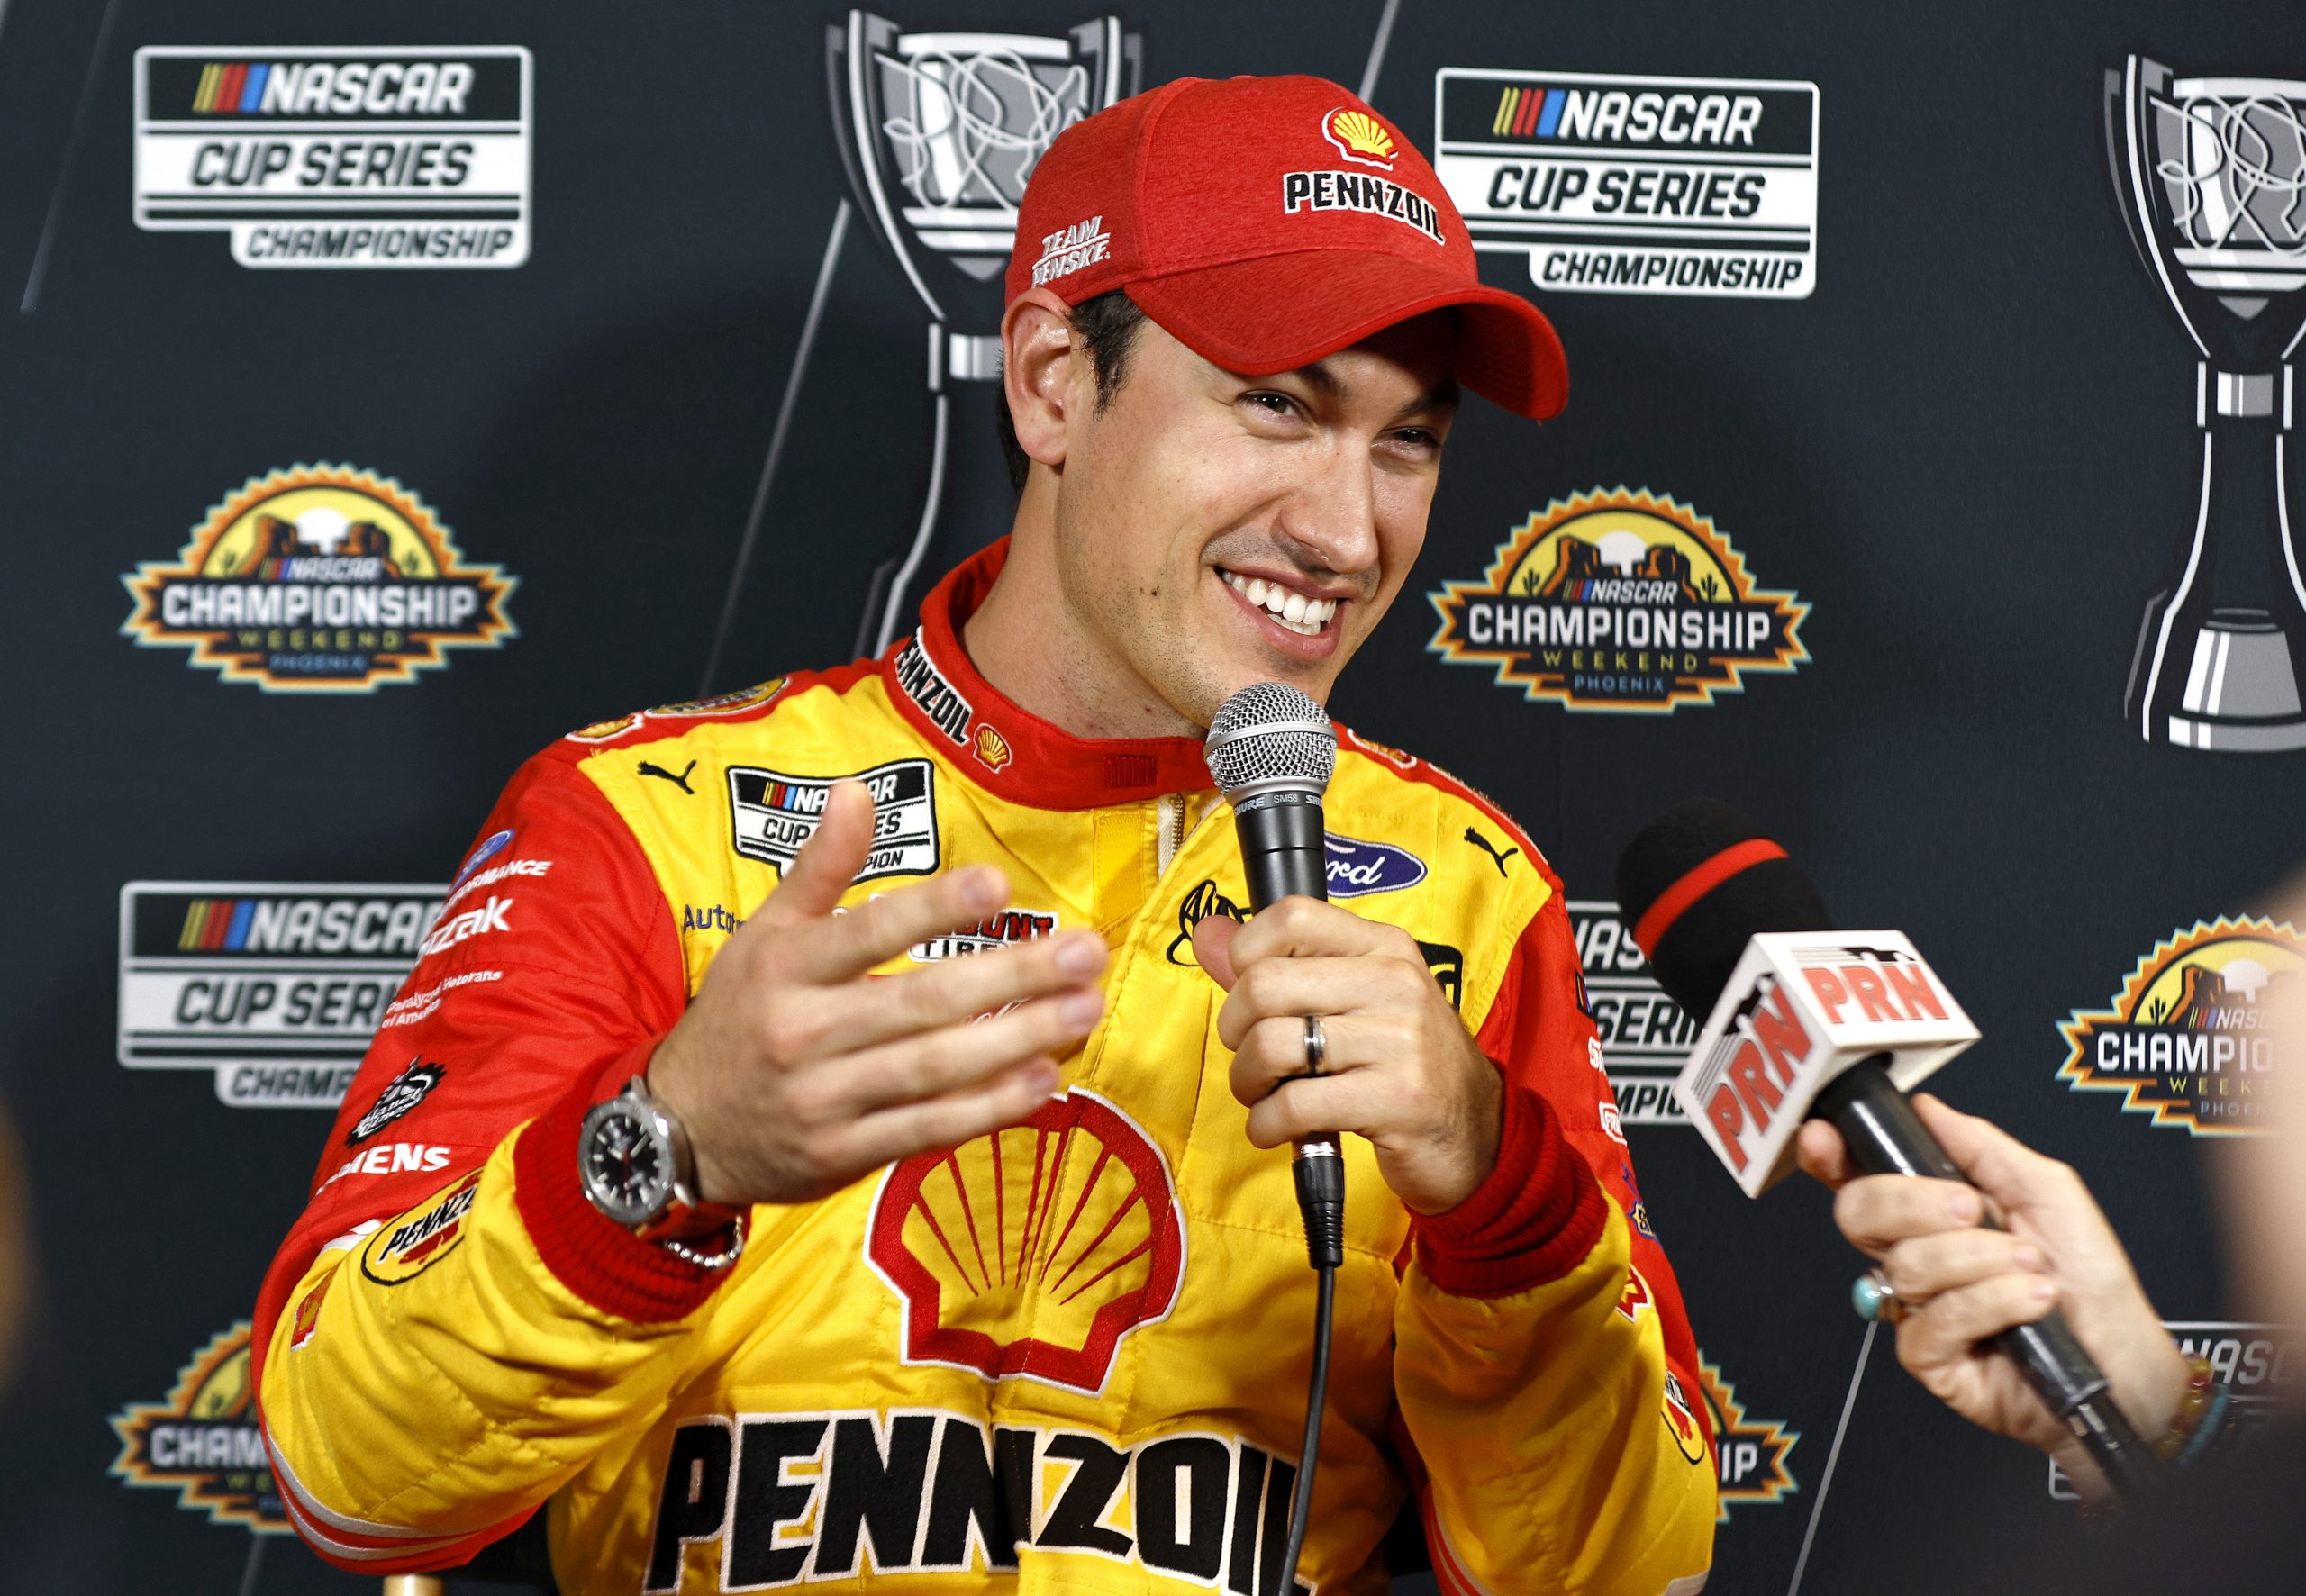 AVONDALE, ARIZONA - NOVEMBER 03: Joey Logano, driver of the #22 Shell Pennzoil Ford, speaks to the media during the NASCAR Championship 4 Media Day at Phoenix Raceway on November 03, 2022 in Avondale, Arizona. (Photo by Sean Gardner/Getty Images)